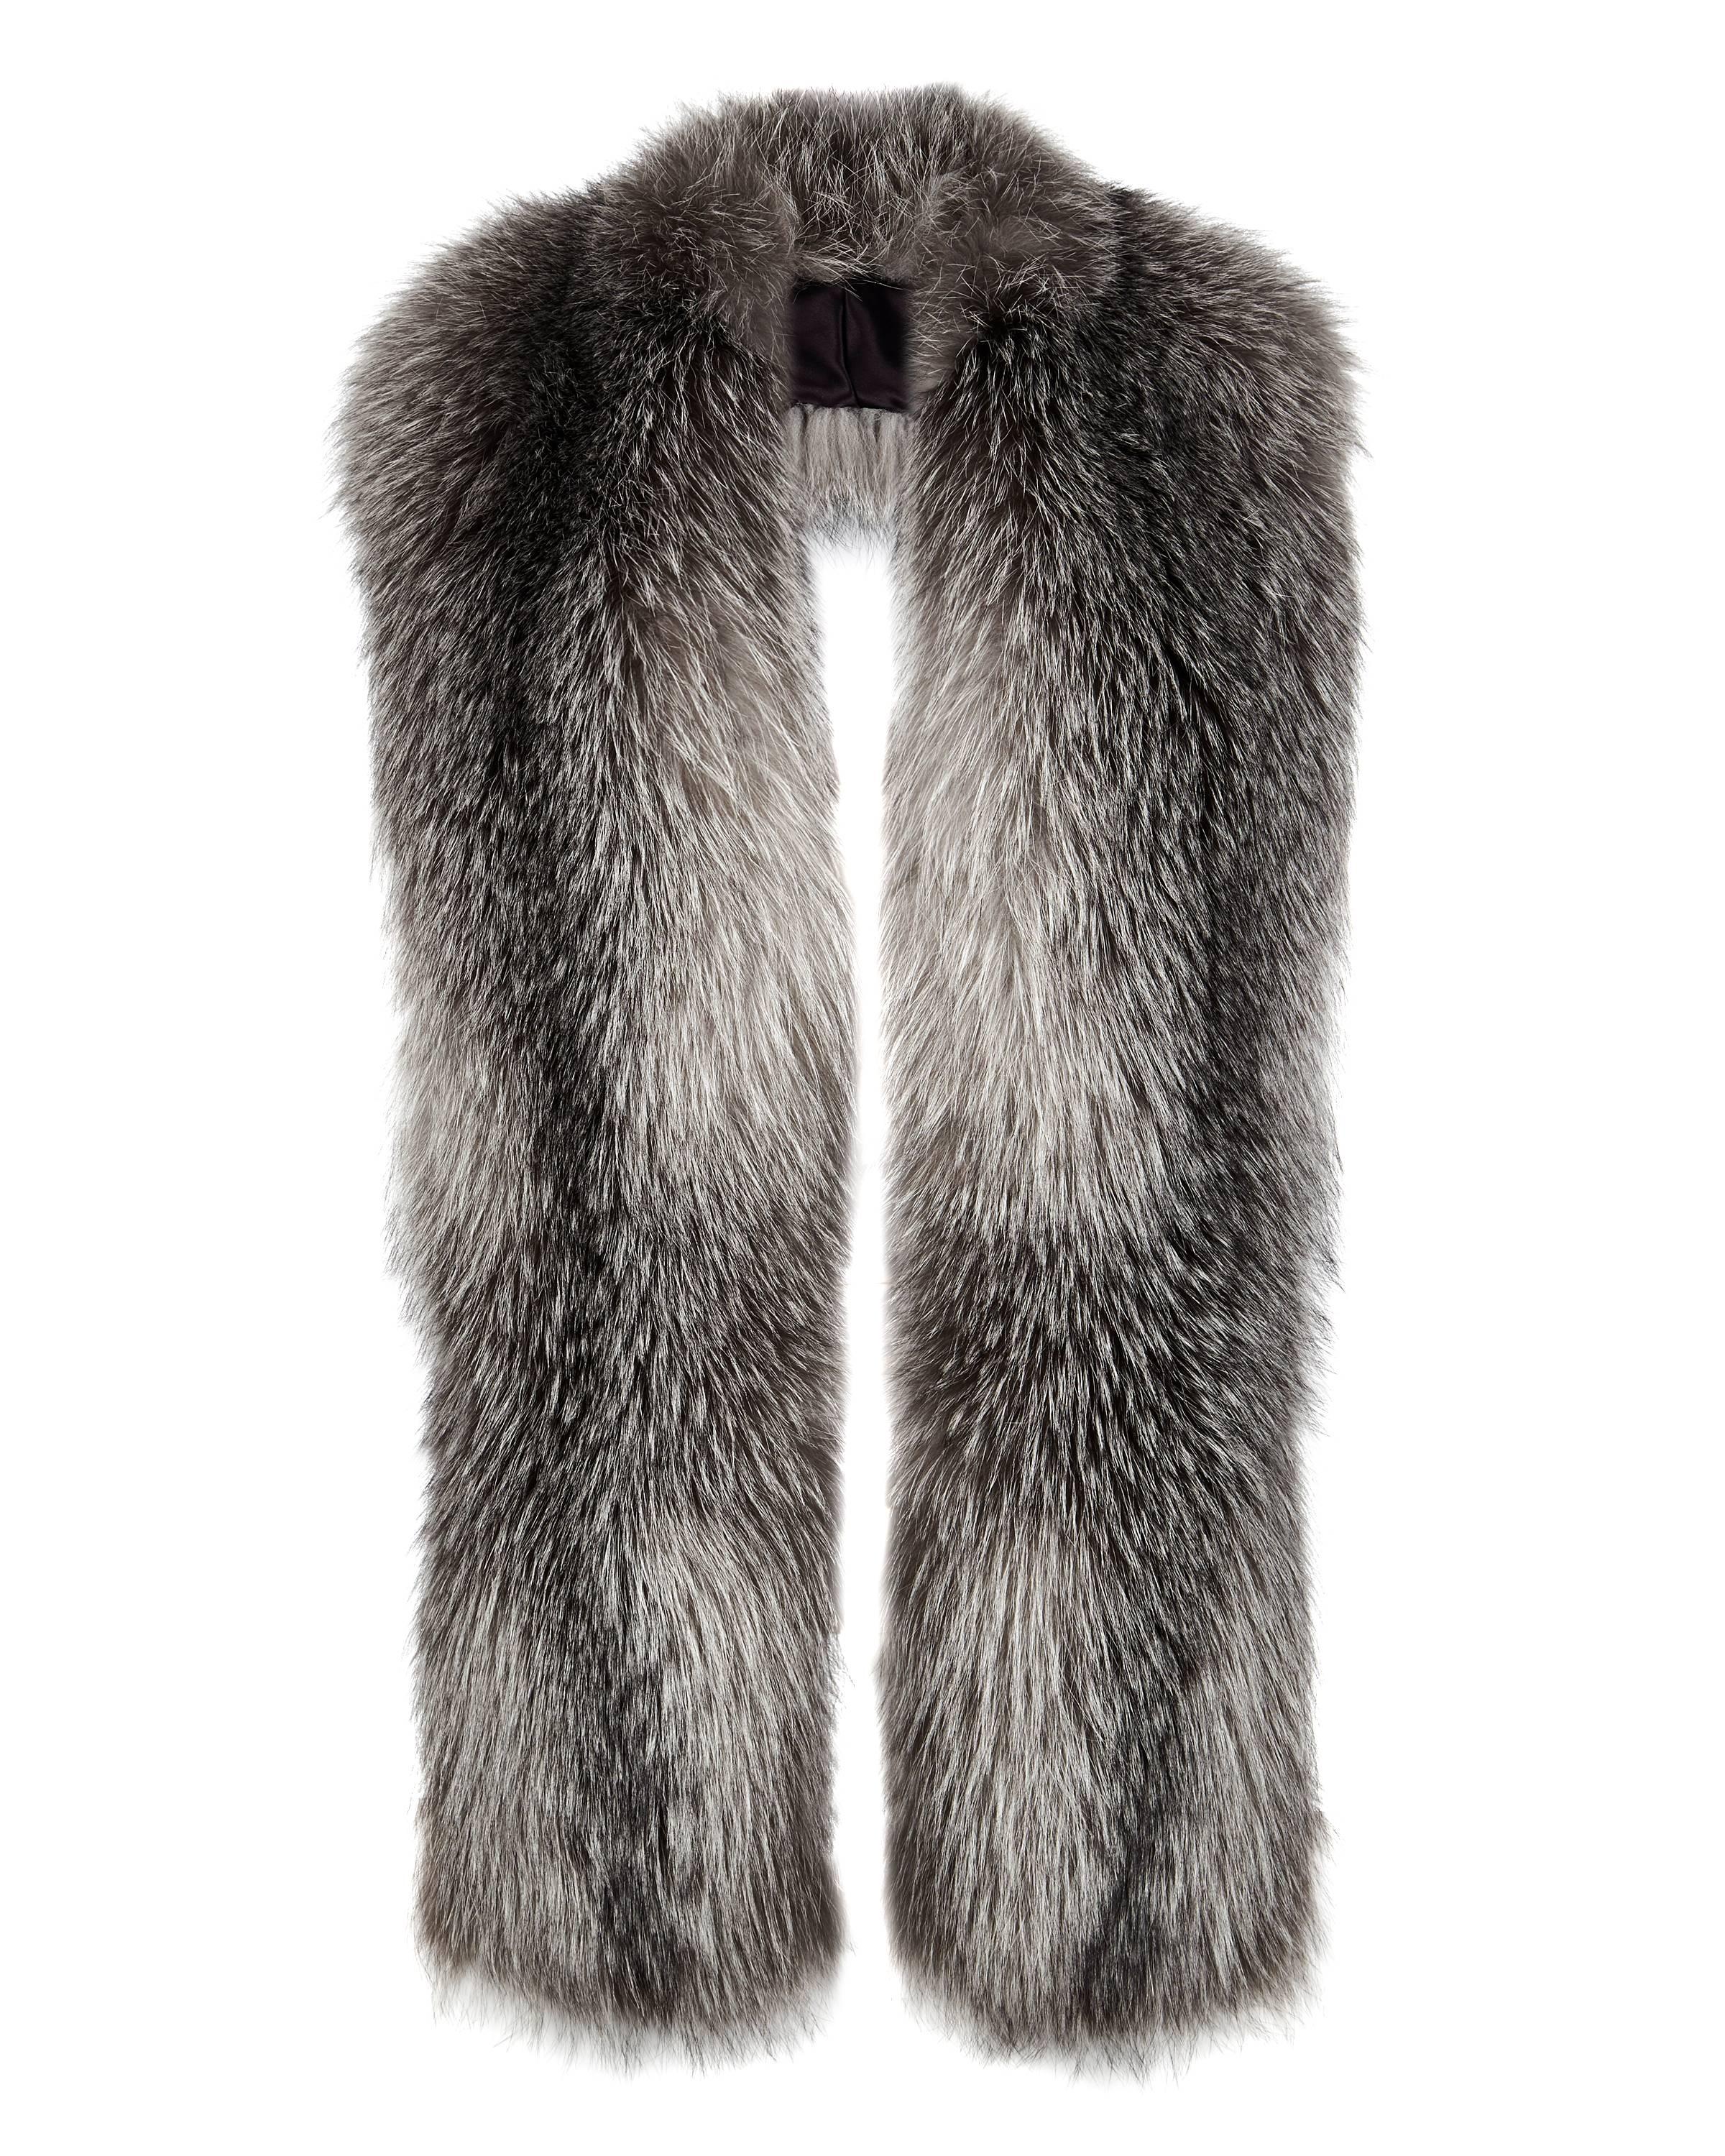 Verheyen London Legacy Stole Natural Blue Frost Fox Fur & Silk Lining -Brand New

Worn in 3 ways - as a scarf, collar and statement belted collar. 
This Natural Collection is Verheyen London’s versatile collection for country or city wear, crafted